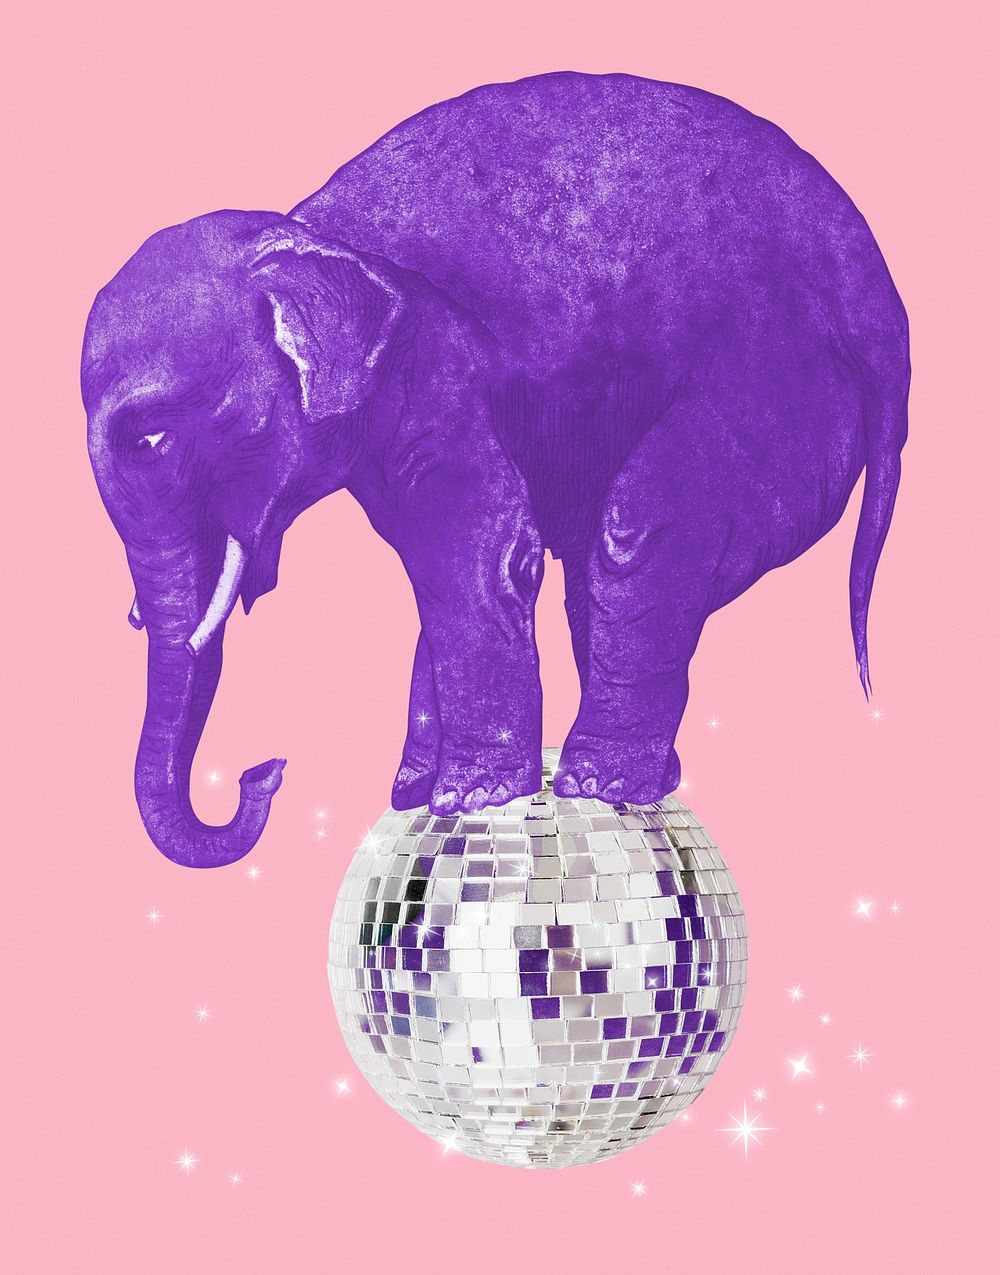 Aesthetic purple elephant png on mirror ball illustration. Remixed by rawpixel.